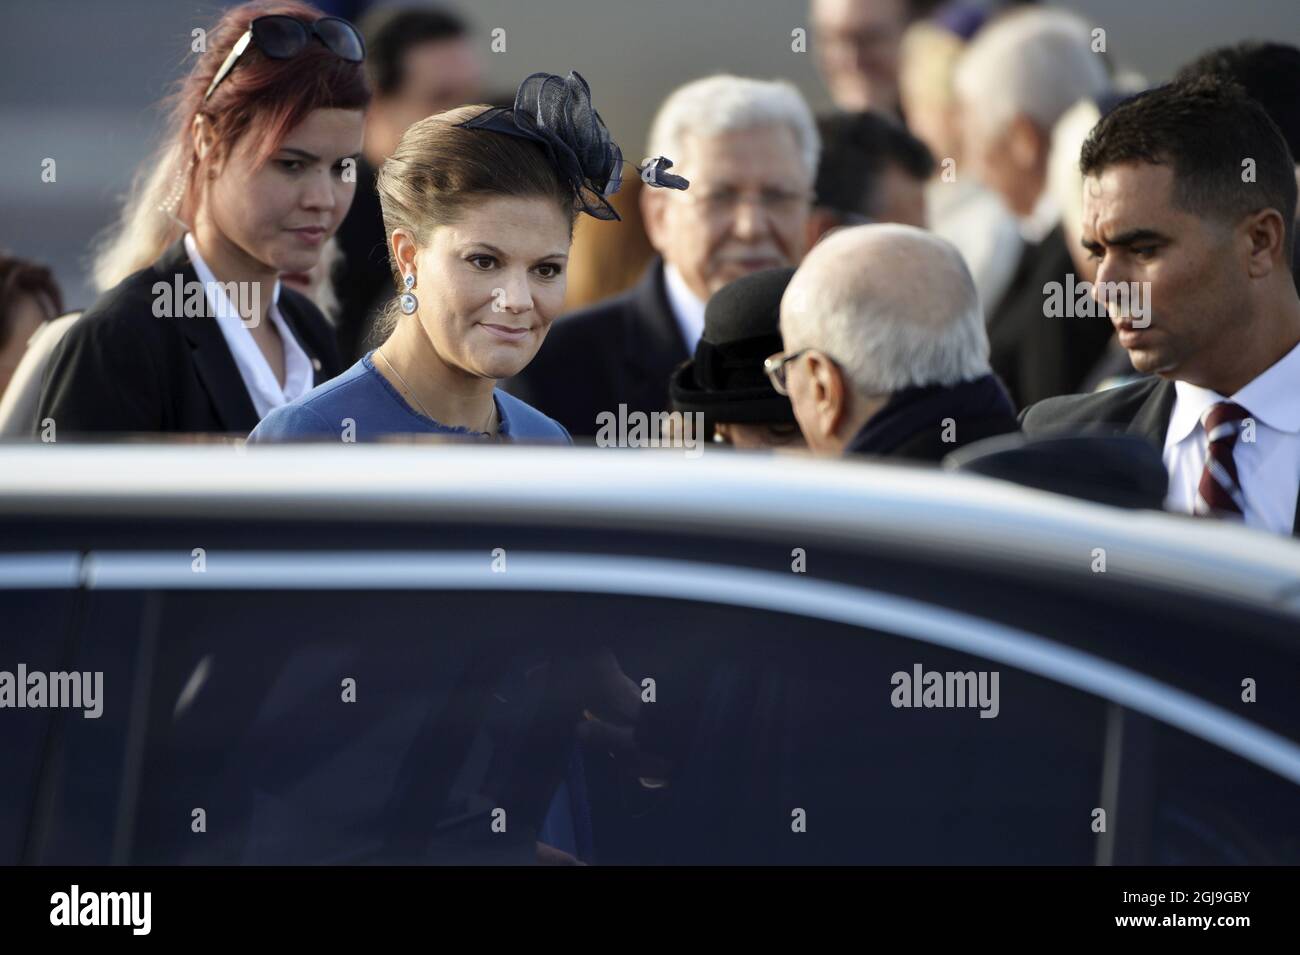 STOCKHOLM 20151104 Crown Princess Victoria and Prince Daniel are seen welcoming the President of Tunisia, Beji CaÃ¯d Essebsi and his wife Saida CaÃ¯d Essebsi, to Arlanda Airport in Stockholm, Sweden, November 4, 2016. The President of Tunisia is on a three day long State Visit to Sweden. Foto: Henrik Montgomery / TT / kod 10060  Stock Photo